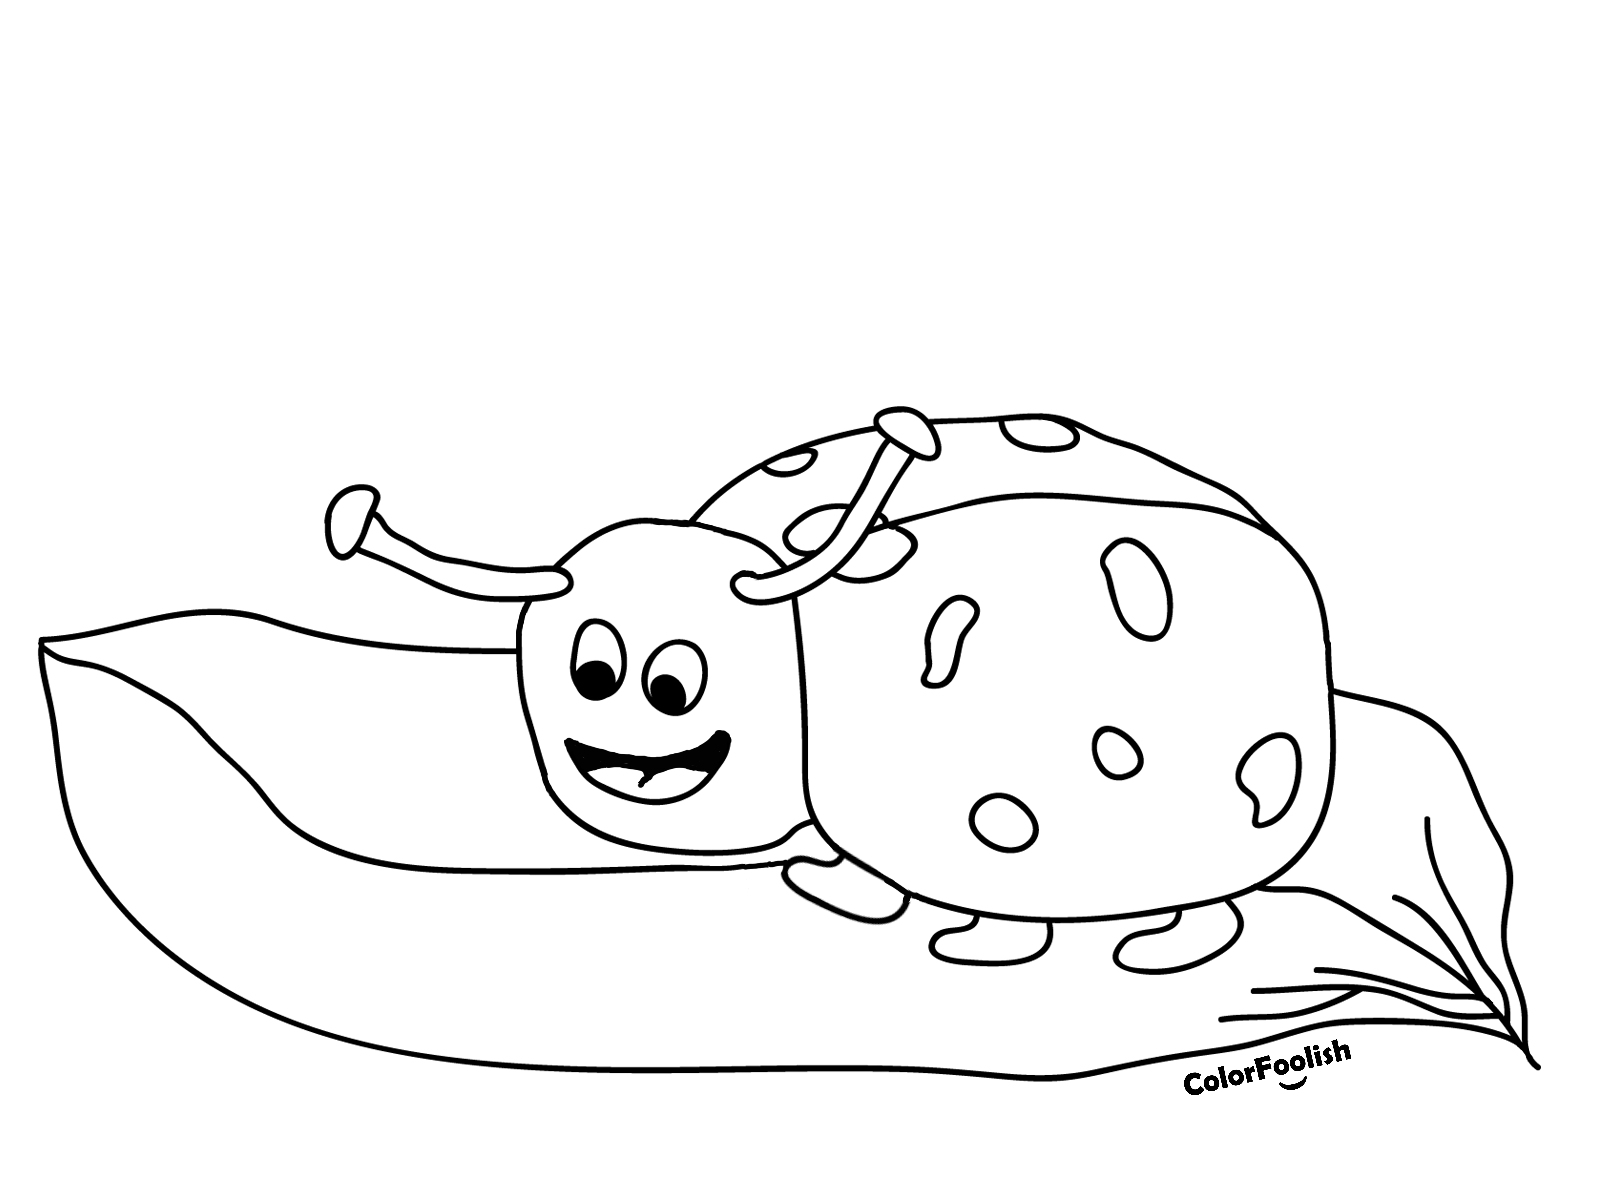 Coloring page of a lady bug on a leaf